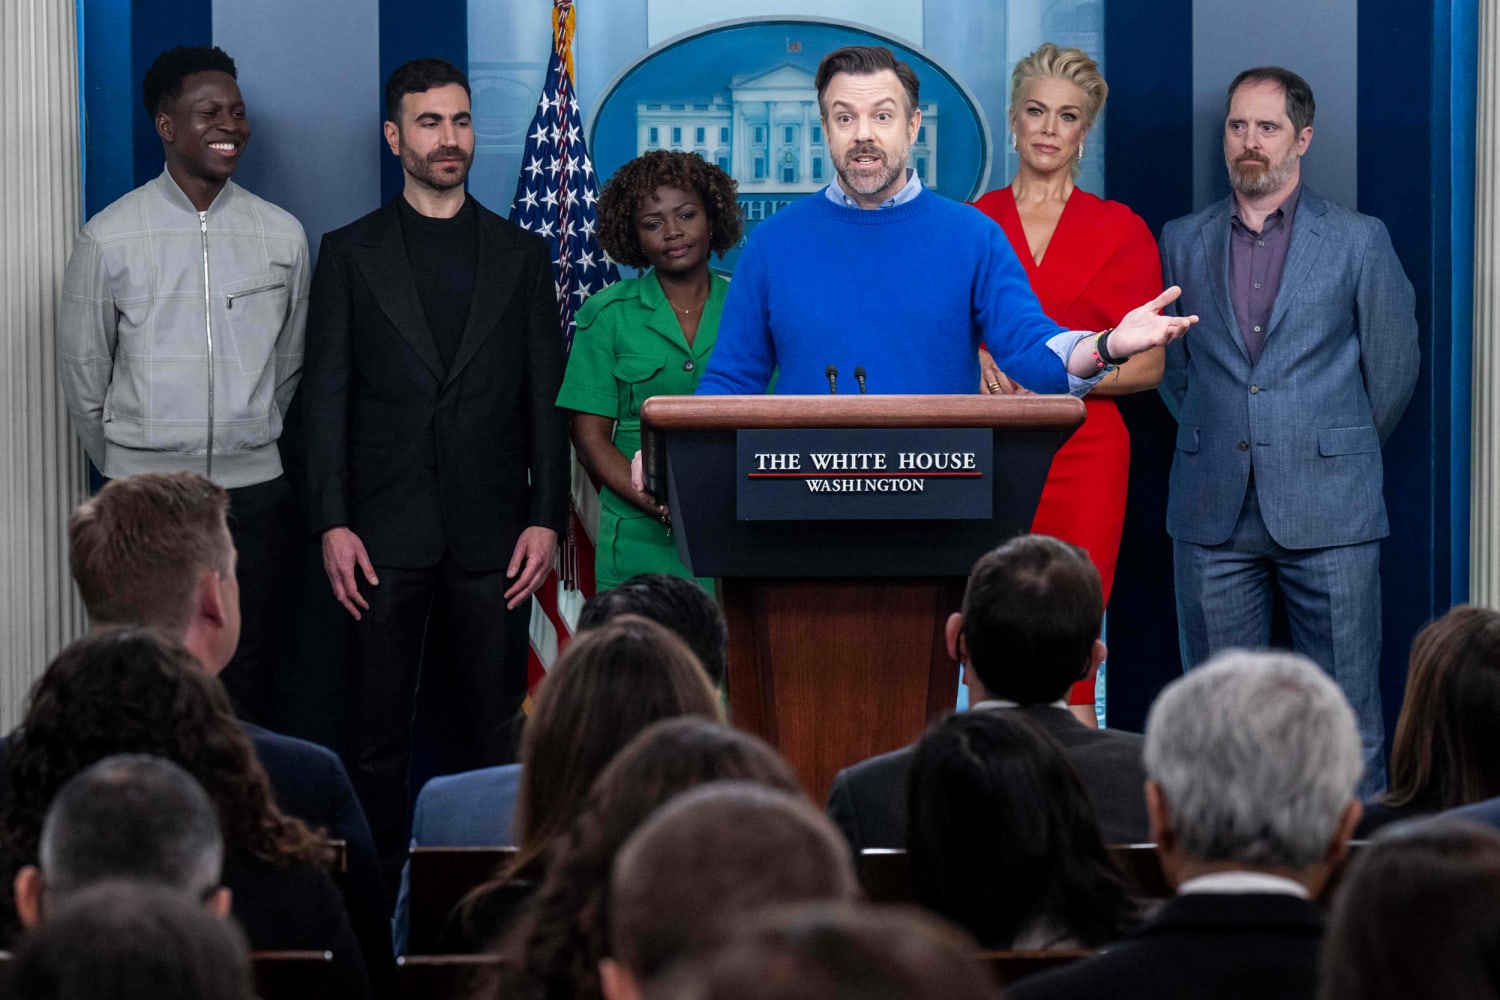 'Ted Lasso' cast joins White House briefing to talk about mental health